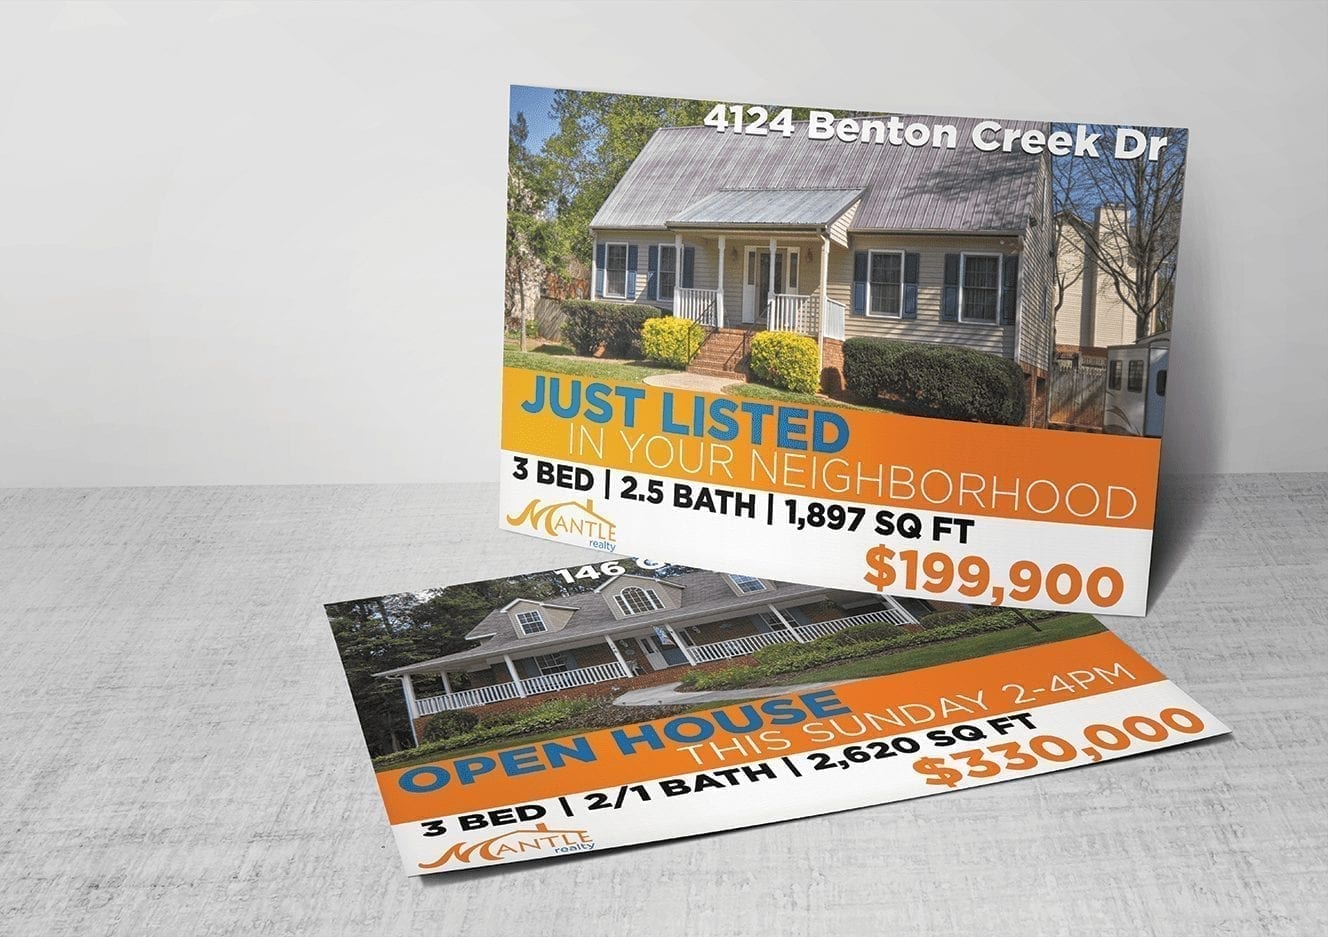 Mantle Realty Post Cards